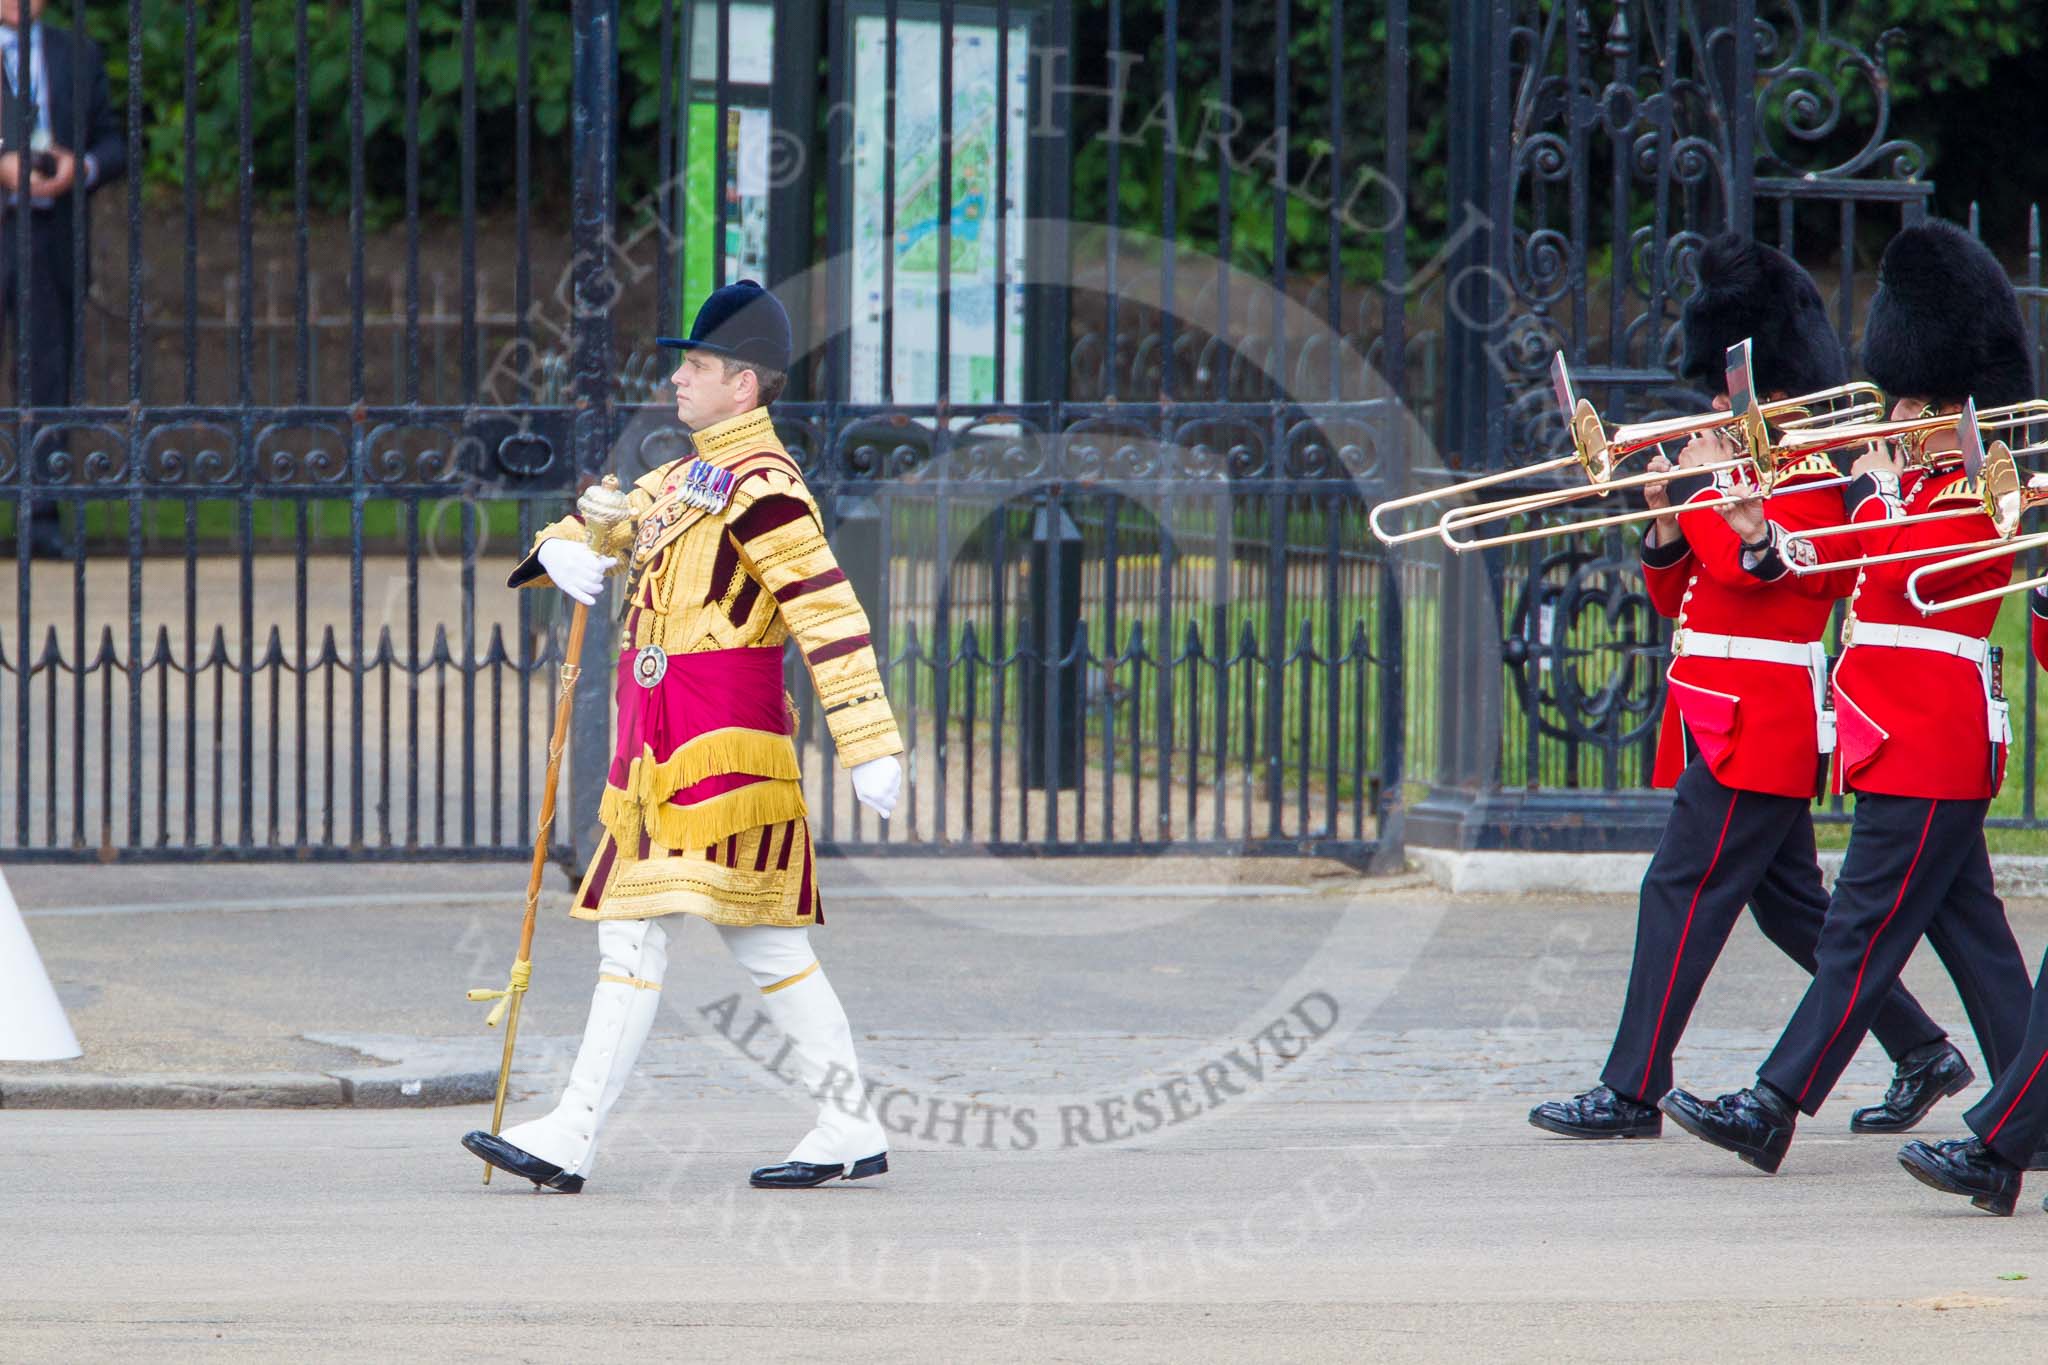 Trooping the Colour 2013: Senior Drum Major Matthew Betts, Grenadier Guards, leading the Band of the Coldstream Guards. Image #41, 15 June 2013 10:11 Horse Guards Parade, London, UK